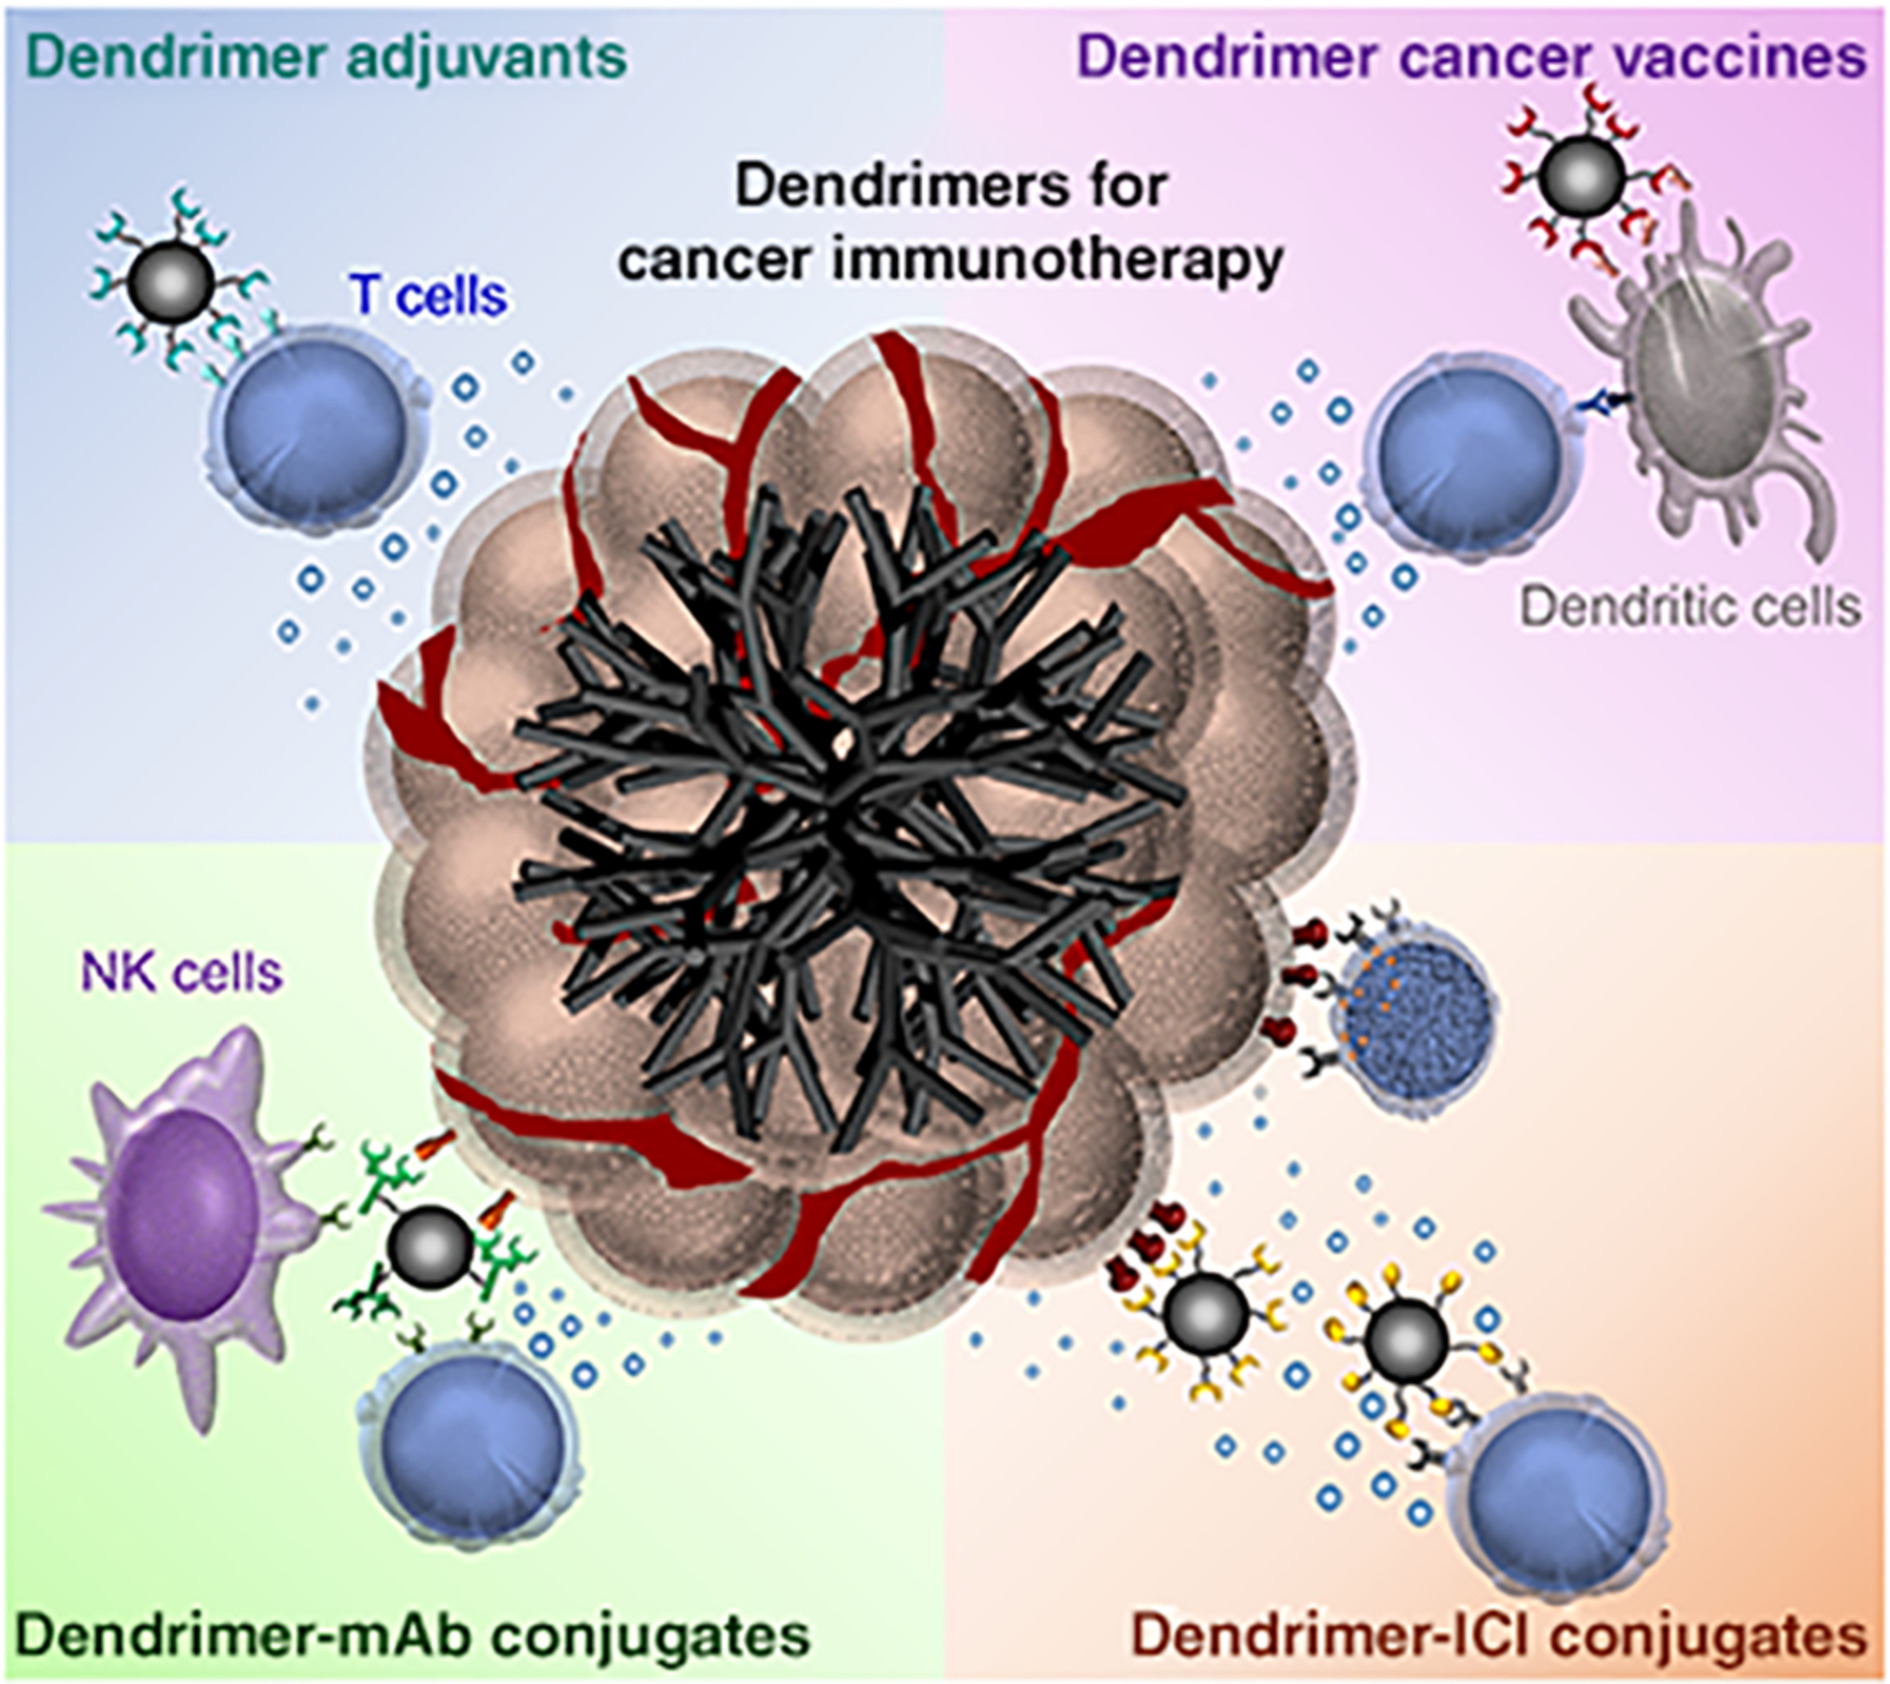 Dendrimers for cancer immunotherapy: Avidity‐based drug delivery vehicles for effective anti‐tumor immune response